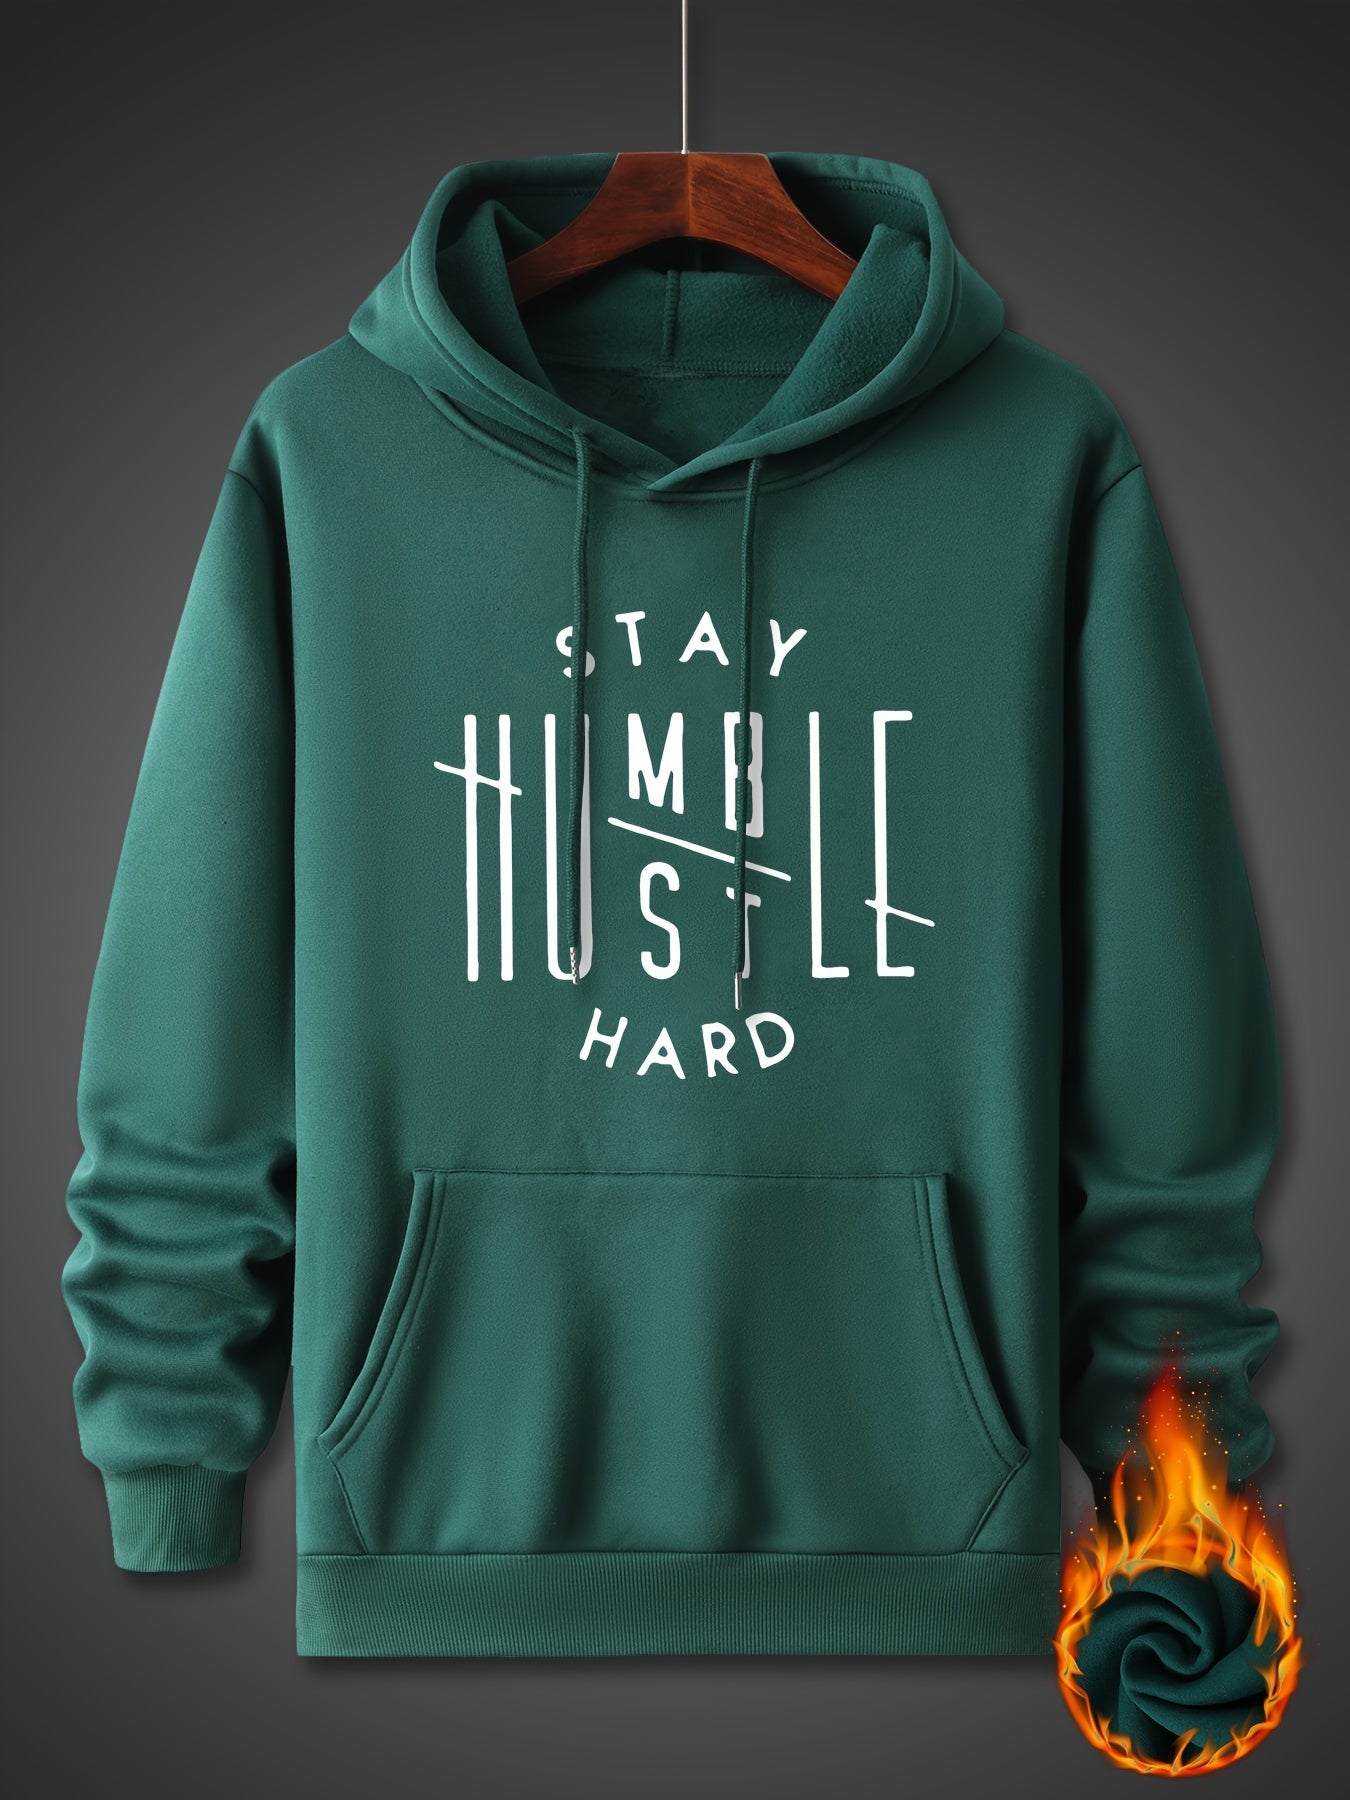 Stay Humble & Hustle Print Hoodie, Cool Hoodies For Men, Men's Casual Graphic Design Pullover Hooded Sweatshirt With Kangaroo Pocket Streetwear For Winter Fall, As Gifts